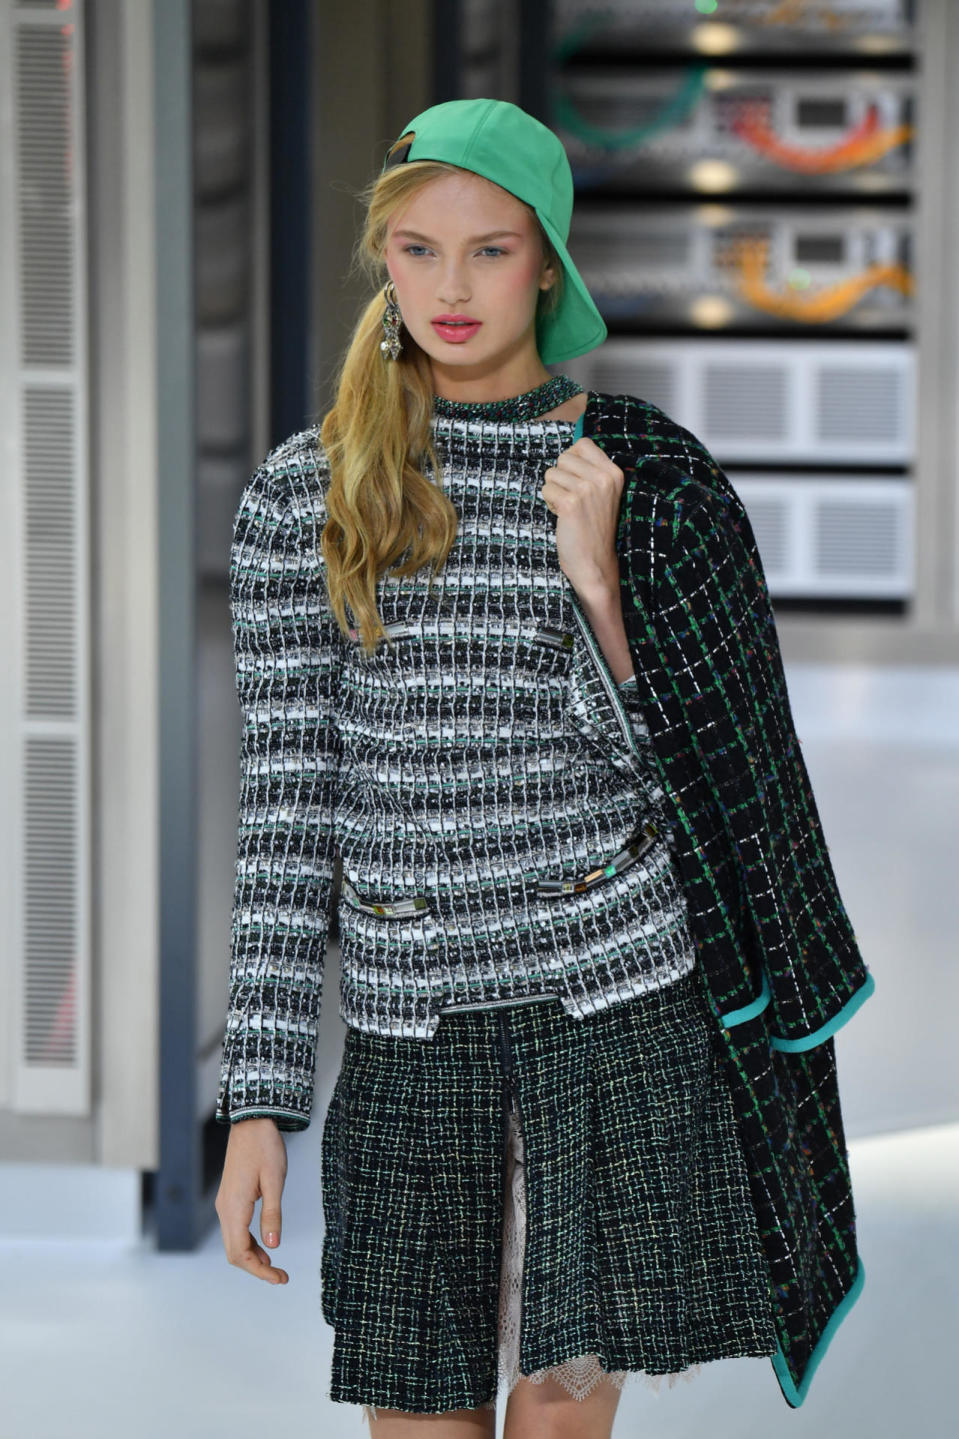 And let’s not forget Chanel’s classic matchy tweed look, shown in green here.